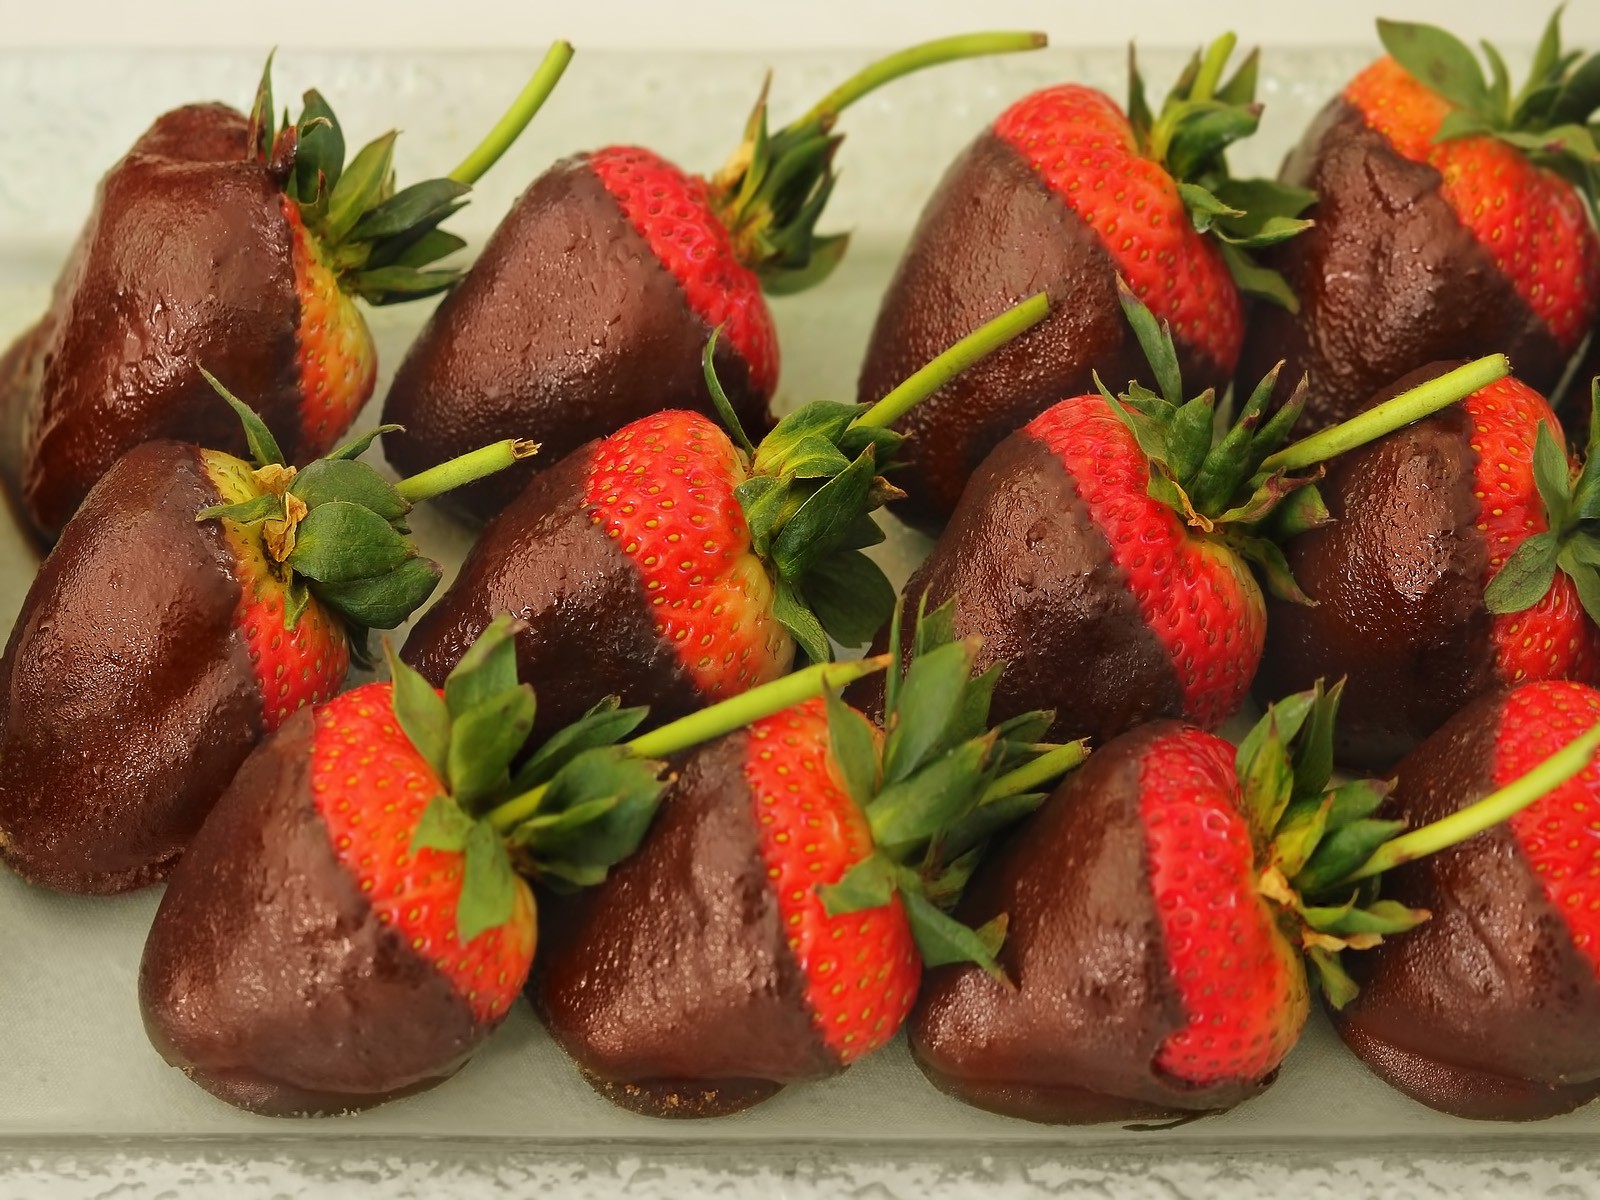 The Strawberry covered with chocolate